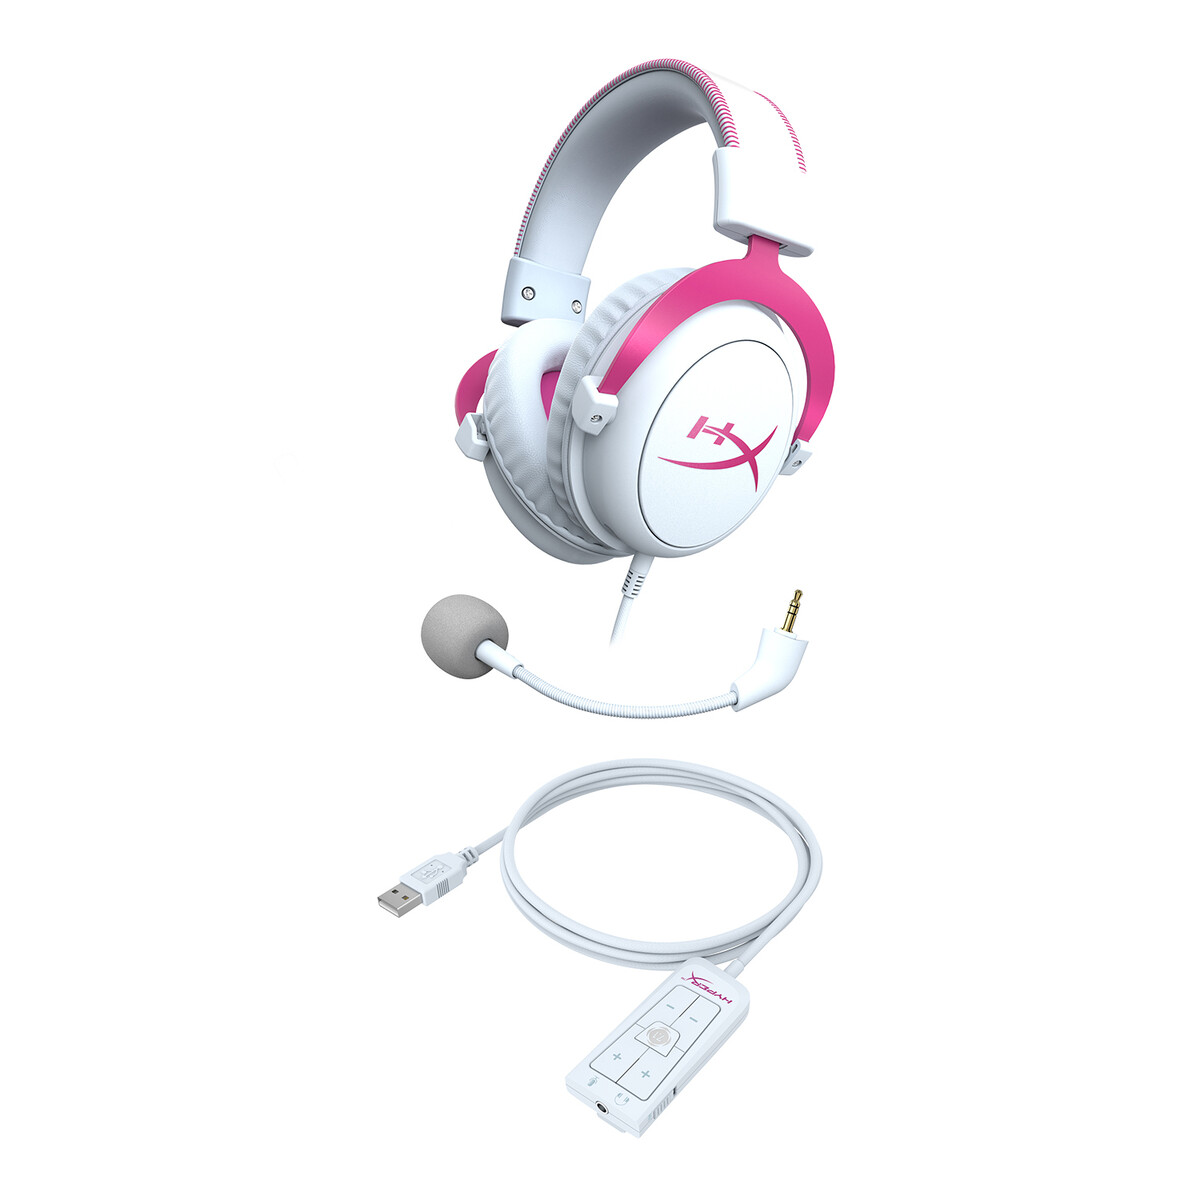 HyperX Cloud II Gaming Headset: New colourful headset introduced